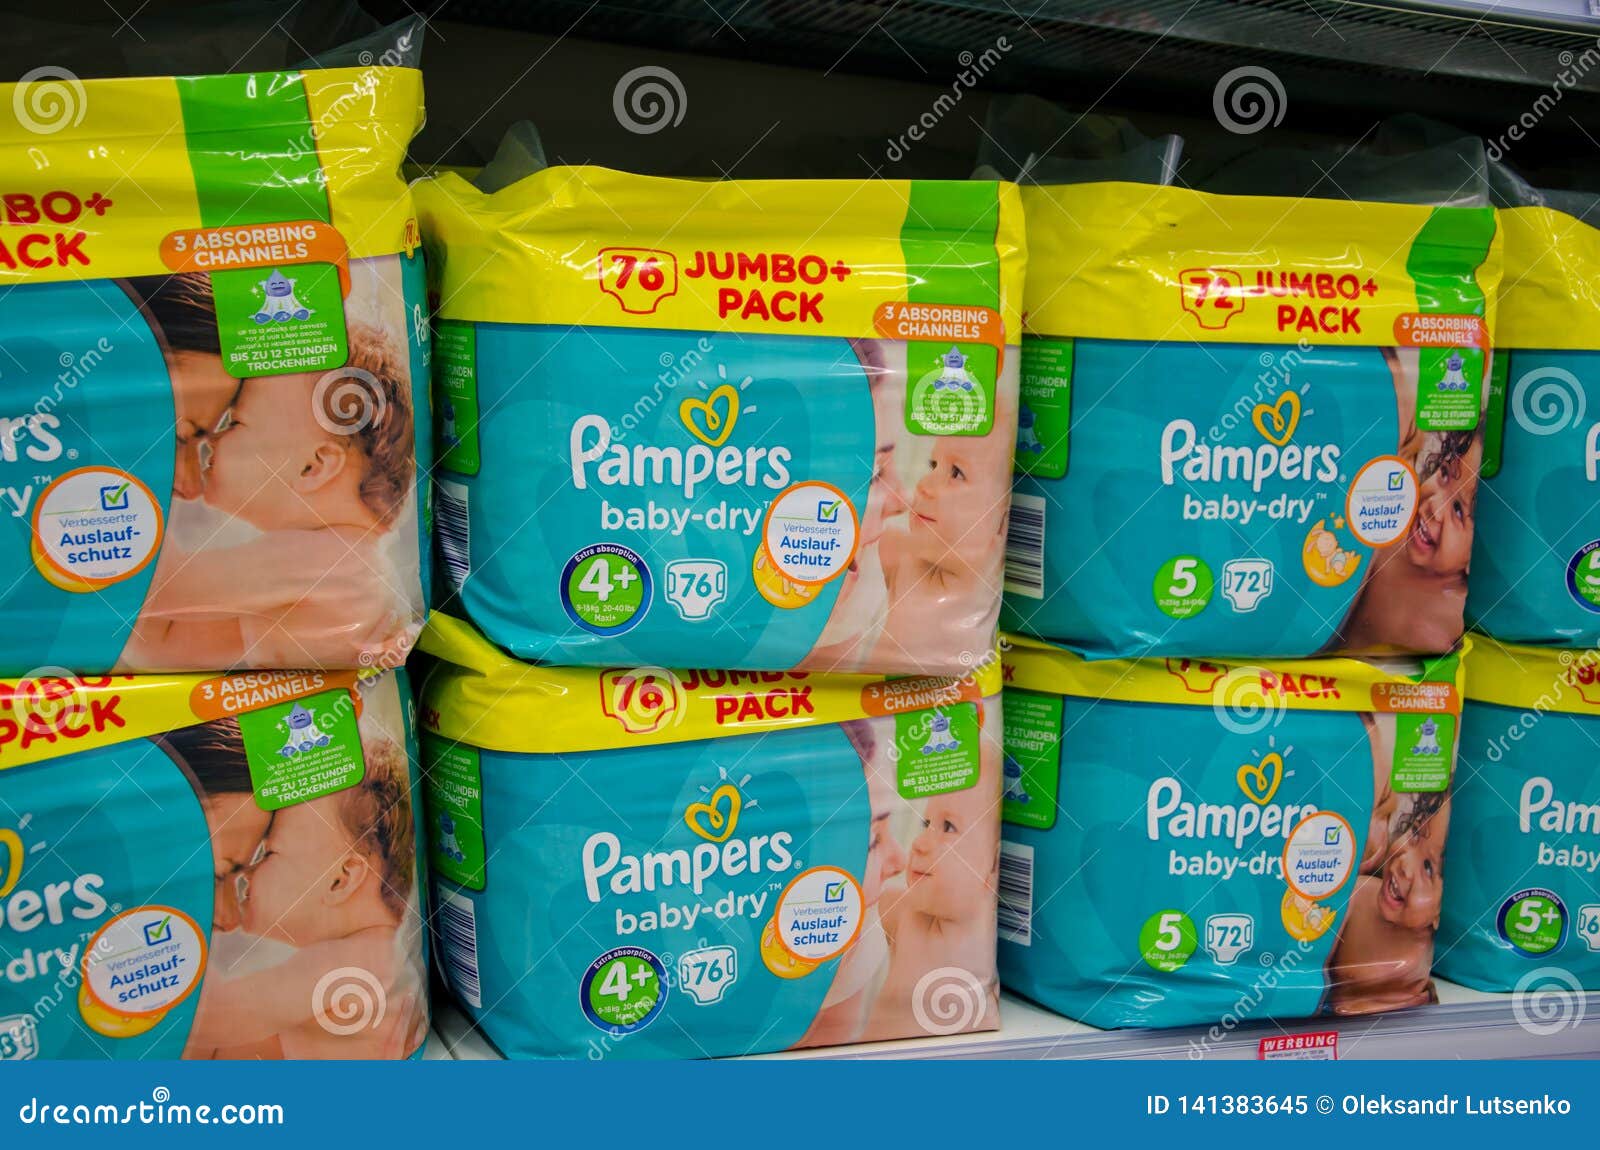 pampers rossma